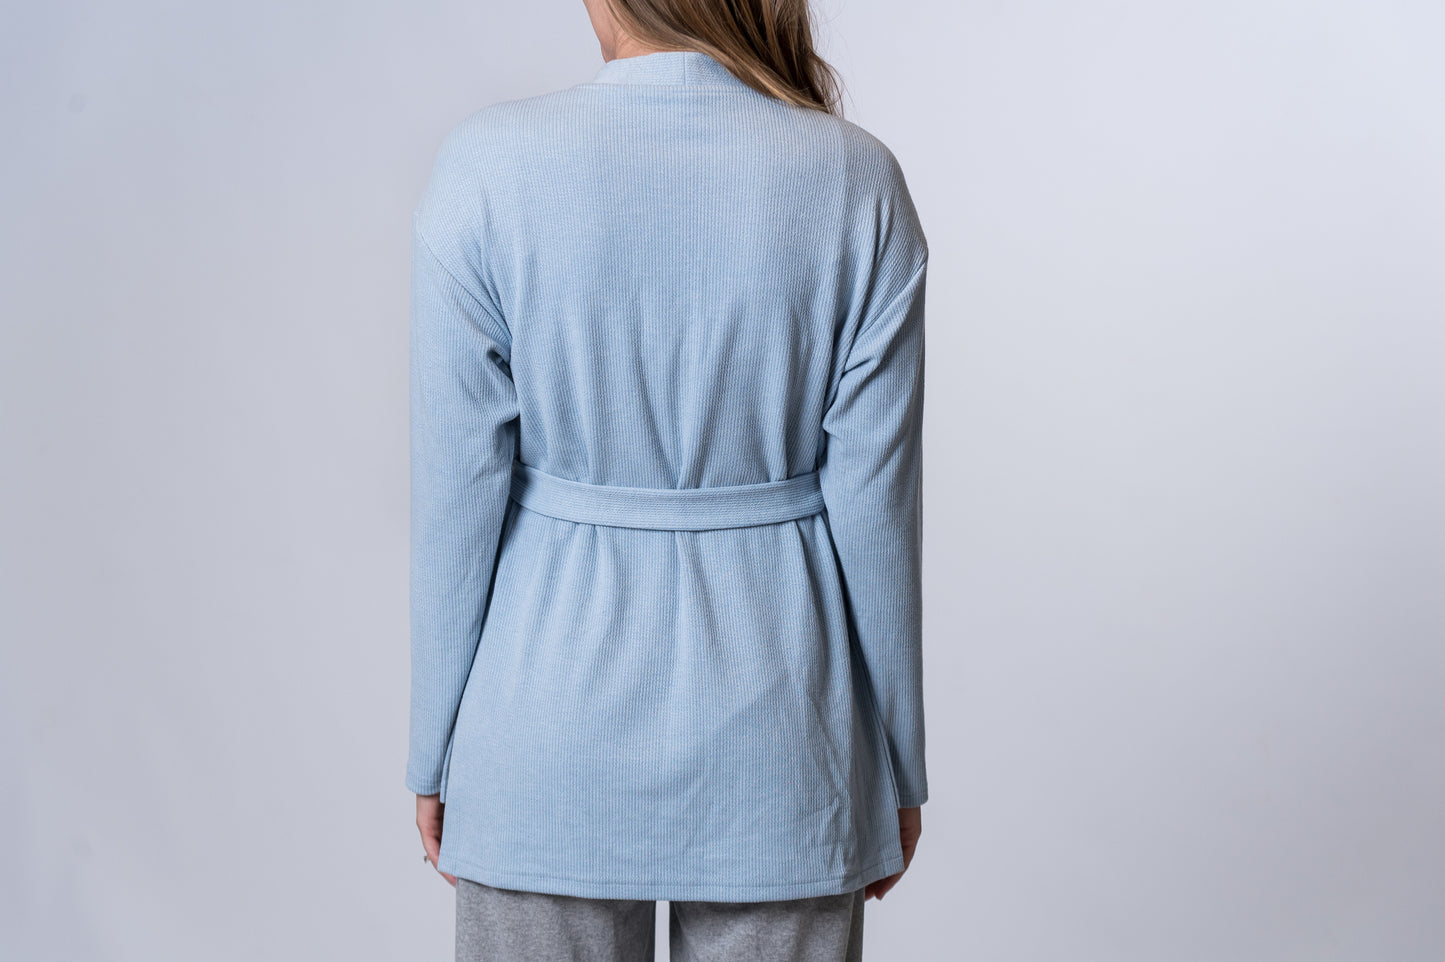 Woman wearing a light blue tie robe with gray lounge pants. Back of clothing is being shown